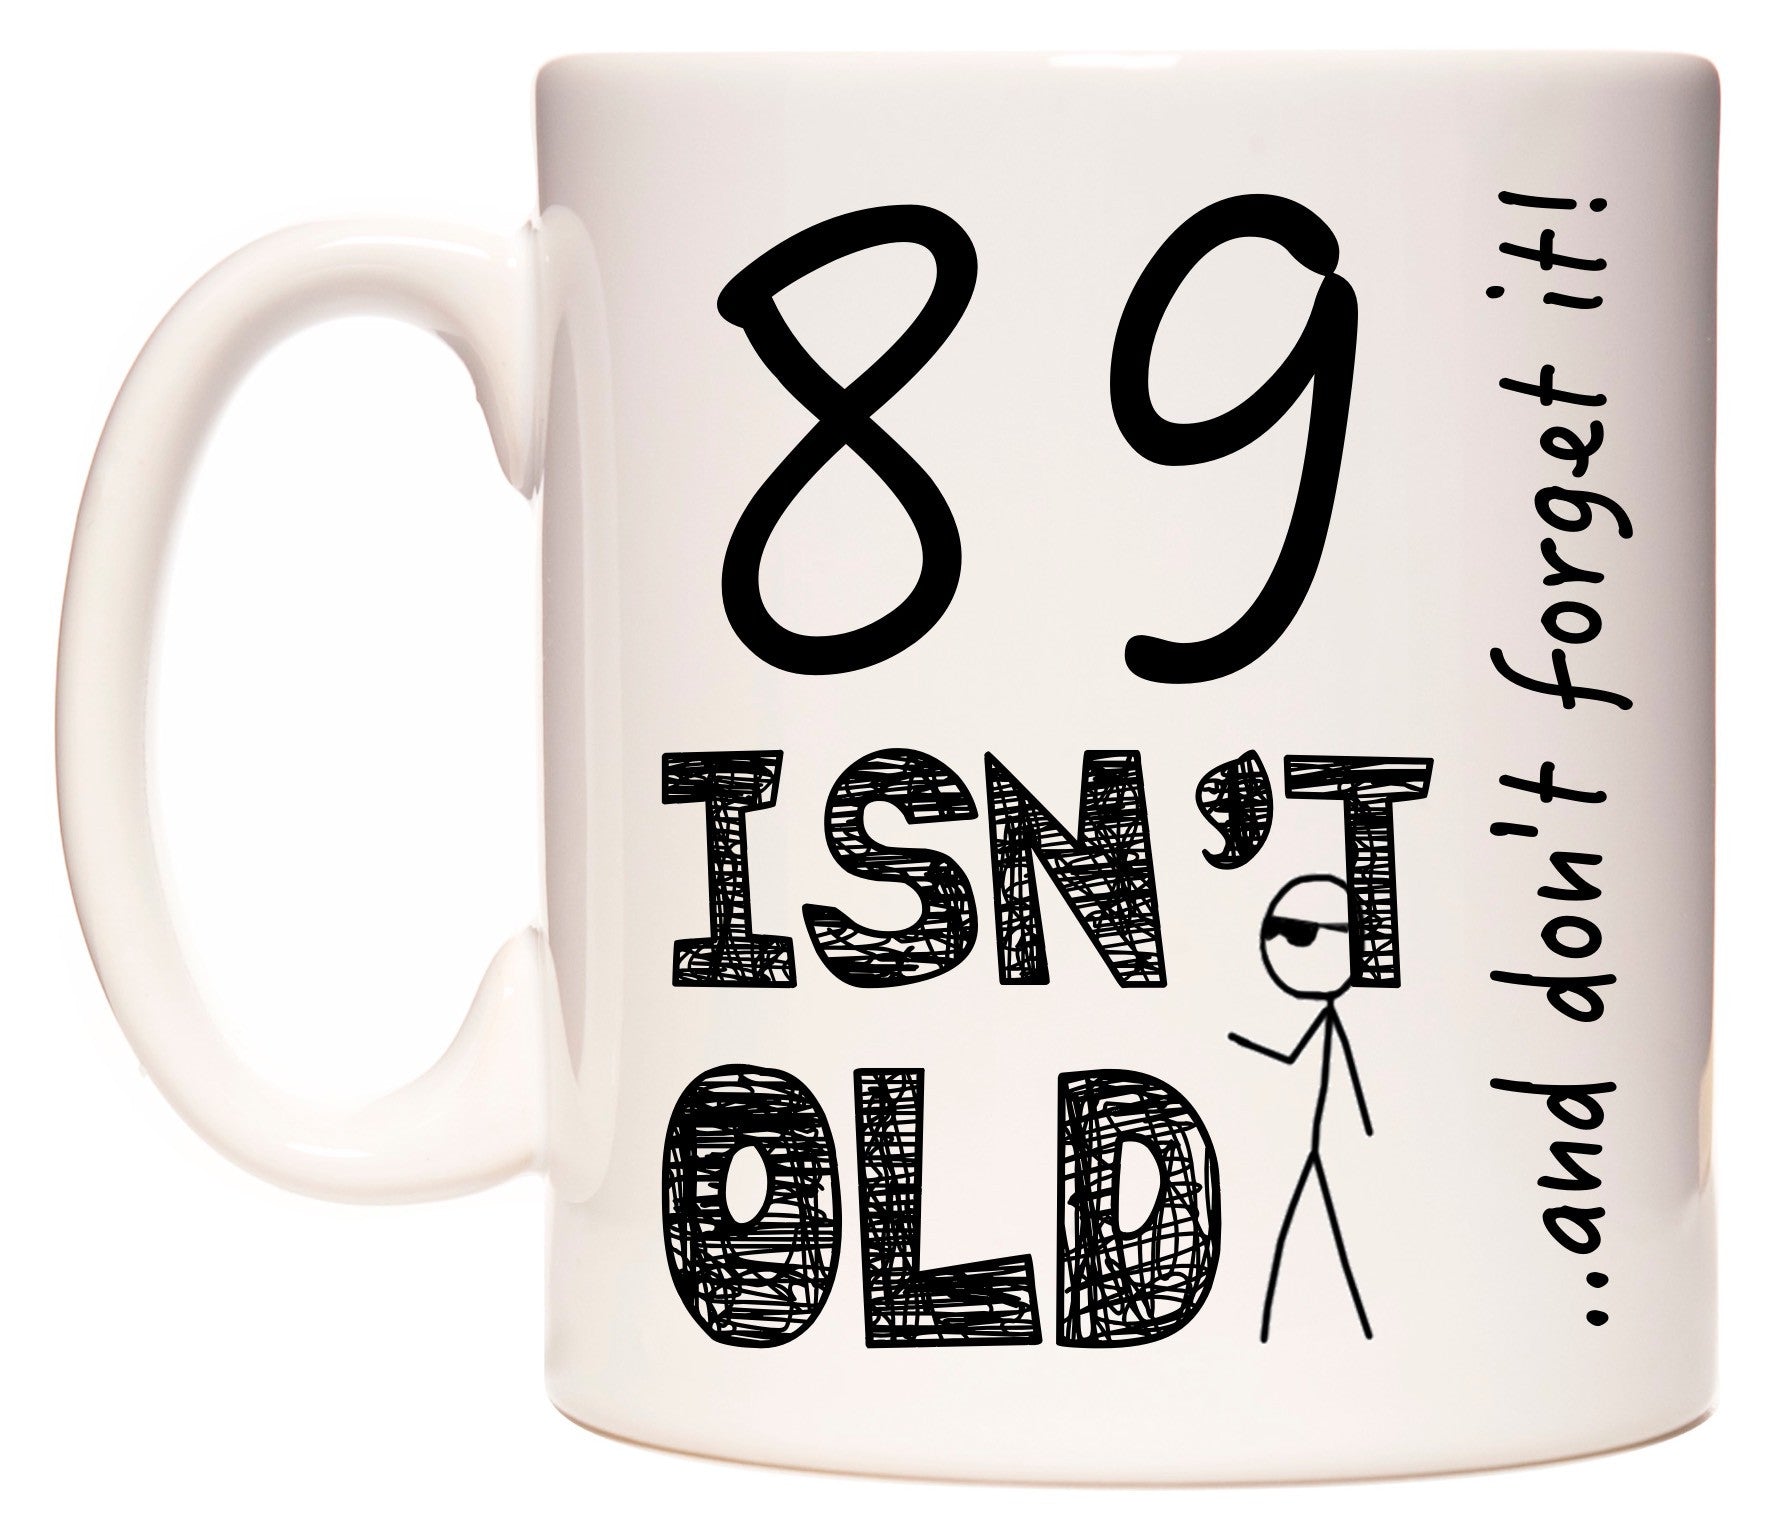 This mug features 89 Isn't Old